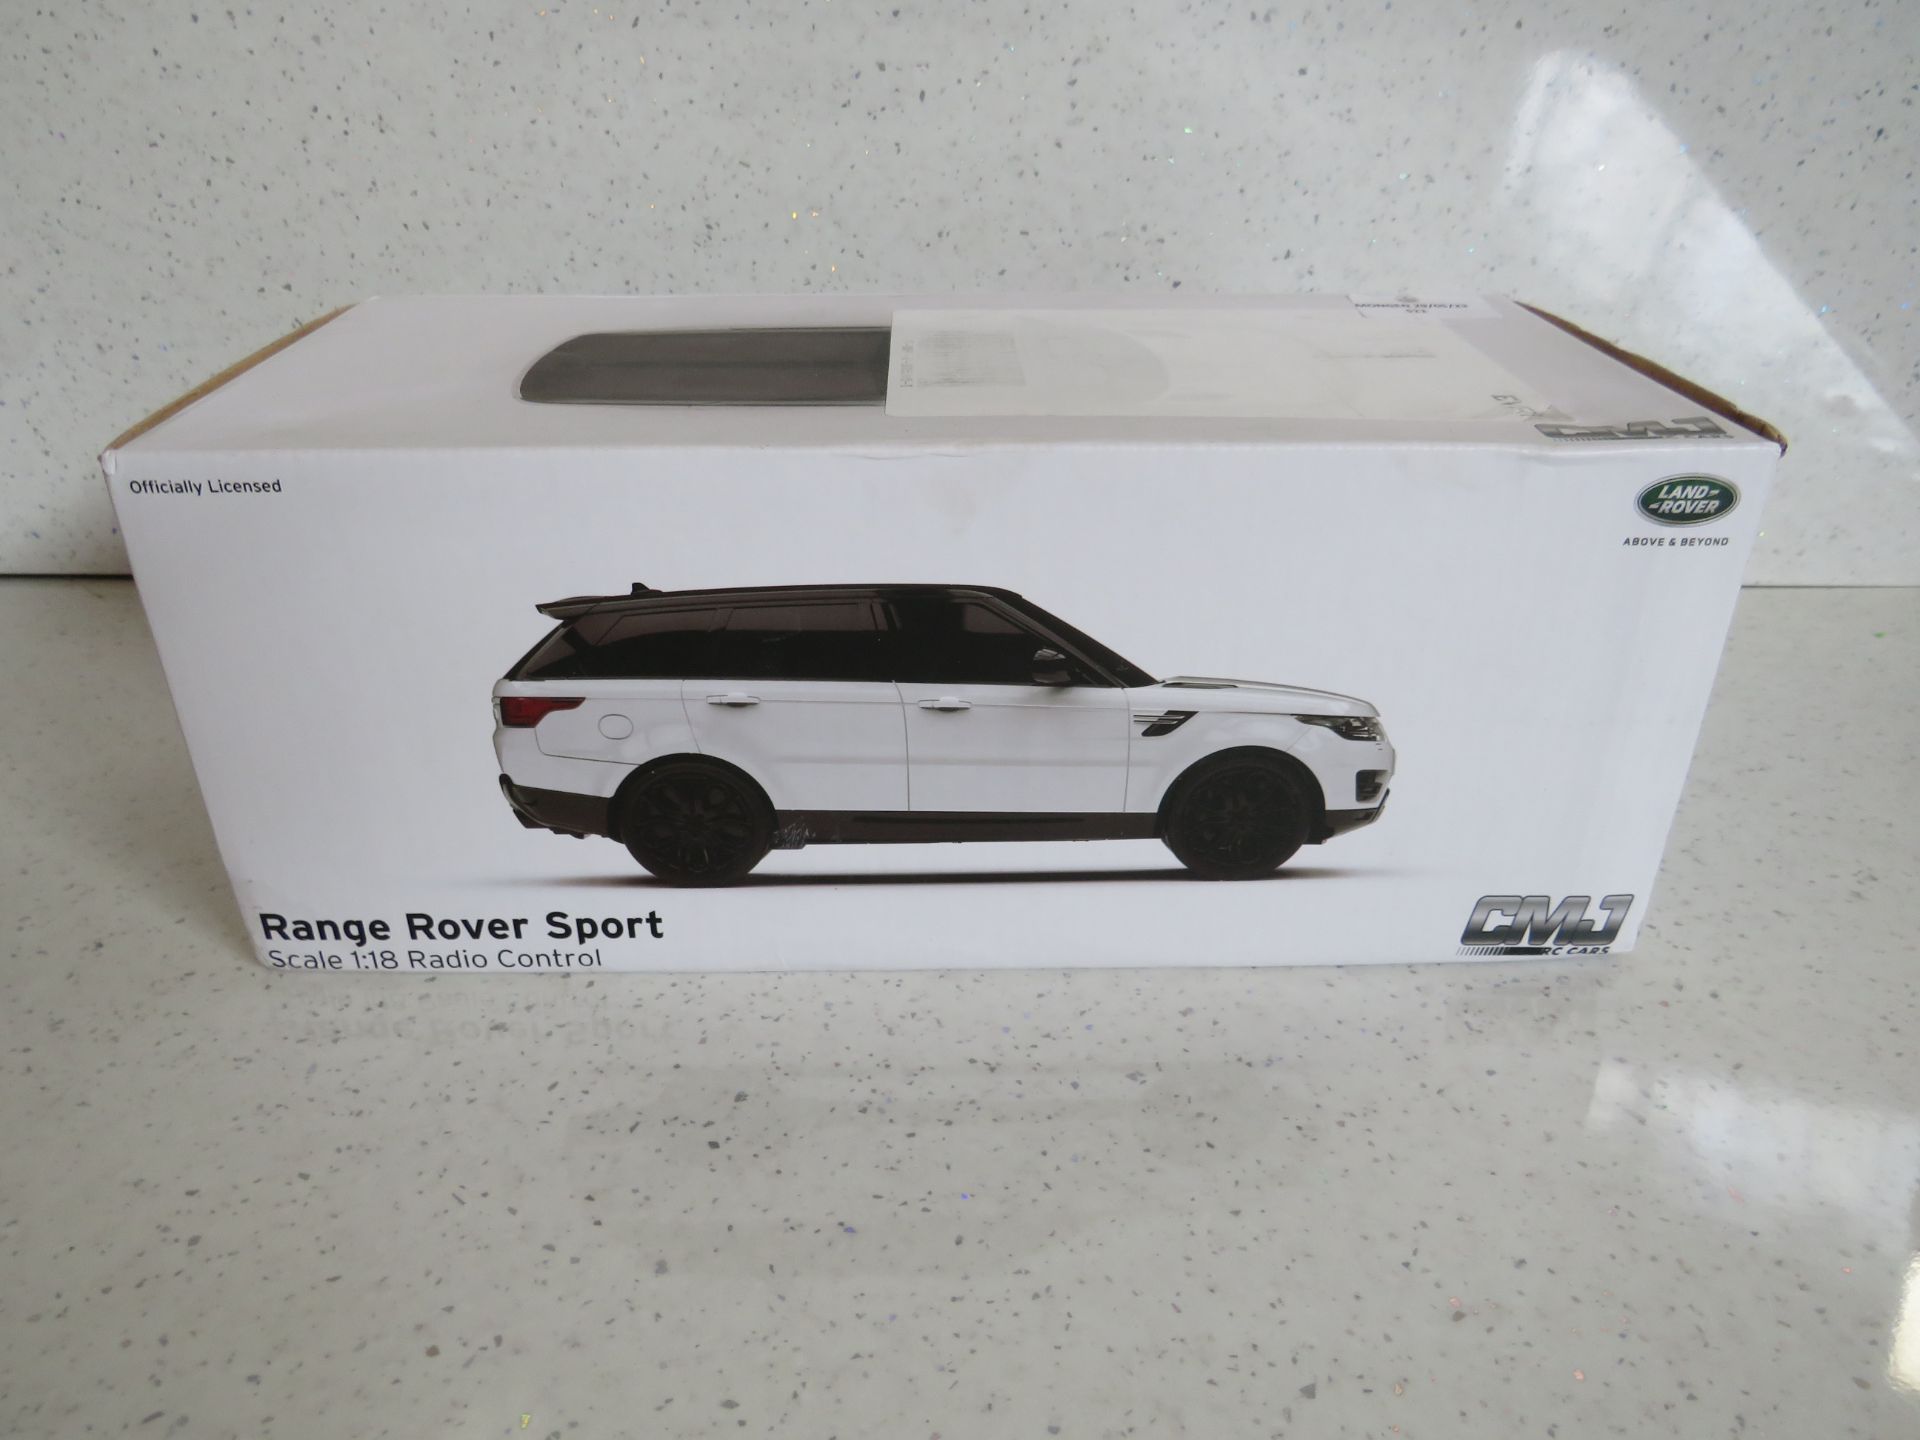 CMJ - Range Rover Sport 1:18 Scale RC Car - Unchecked & Boxed.